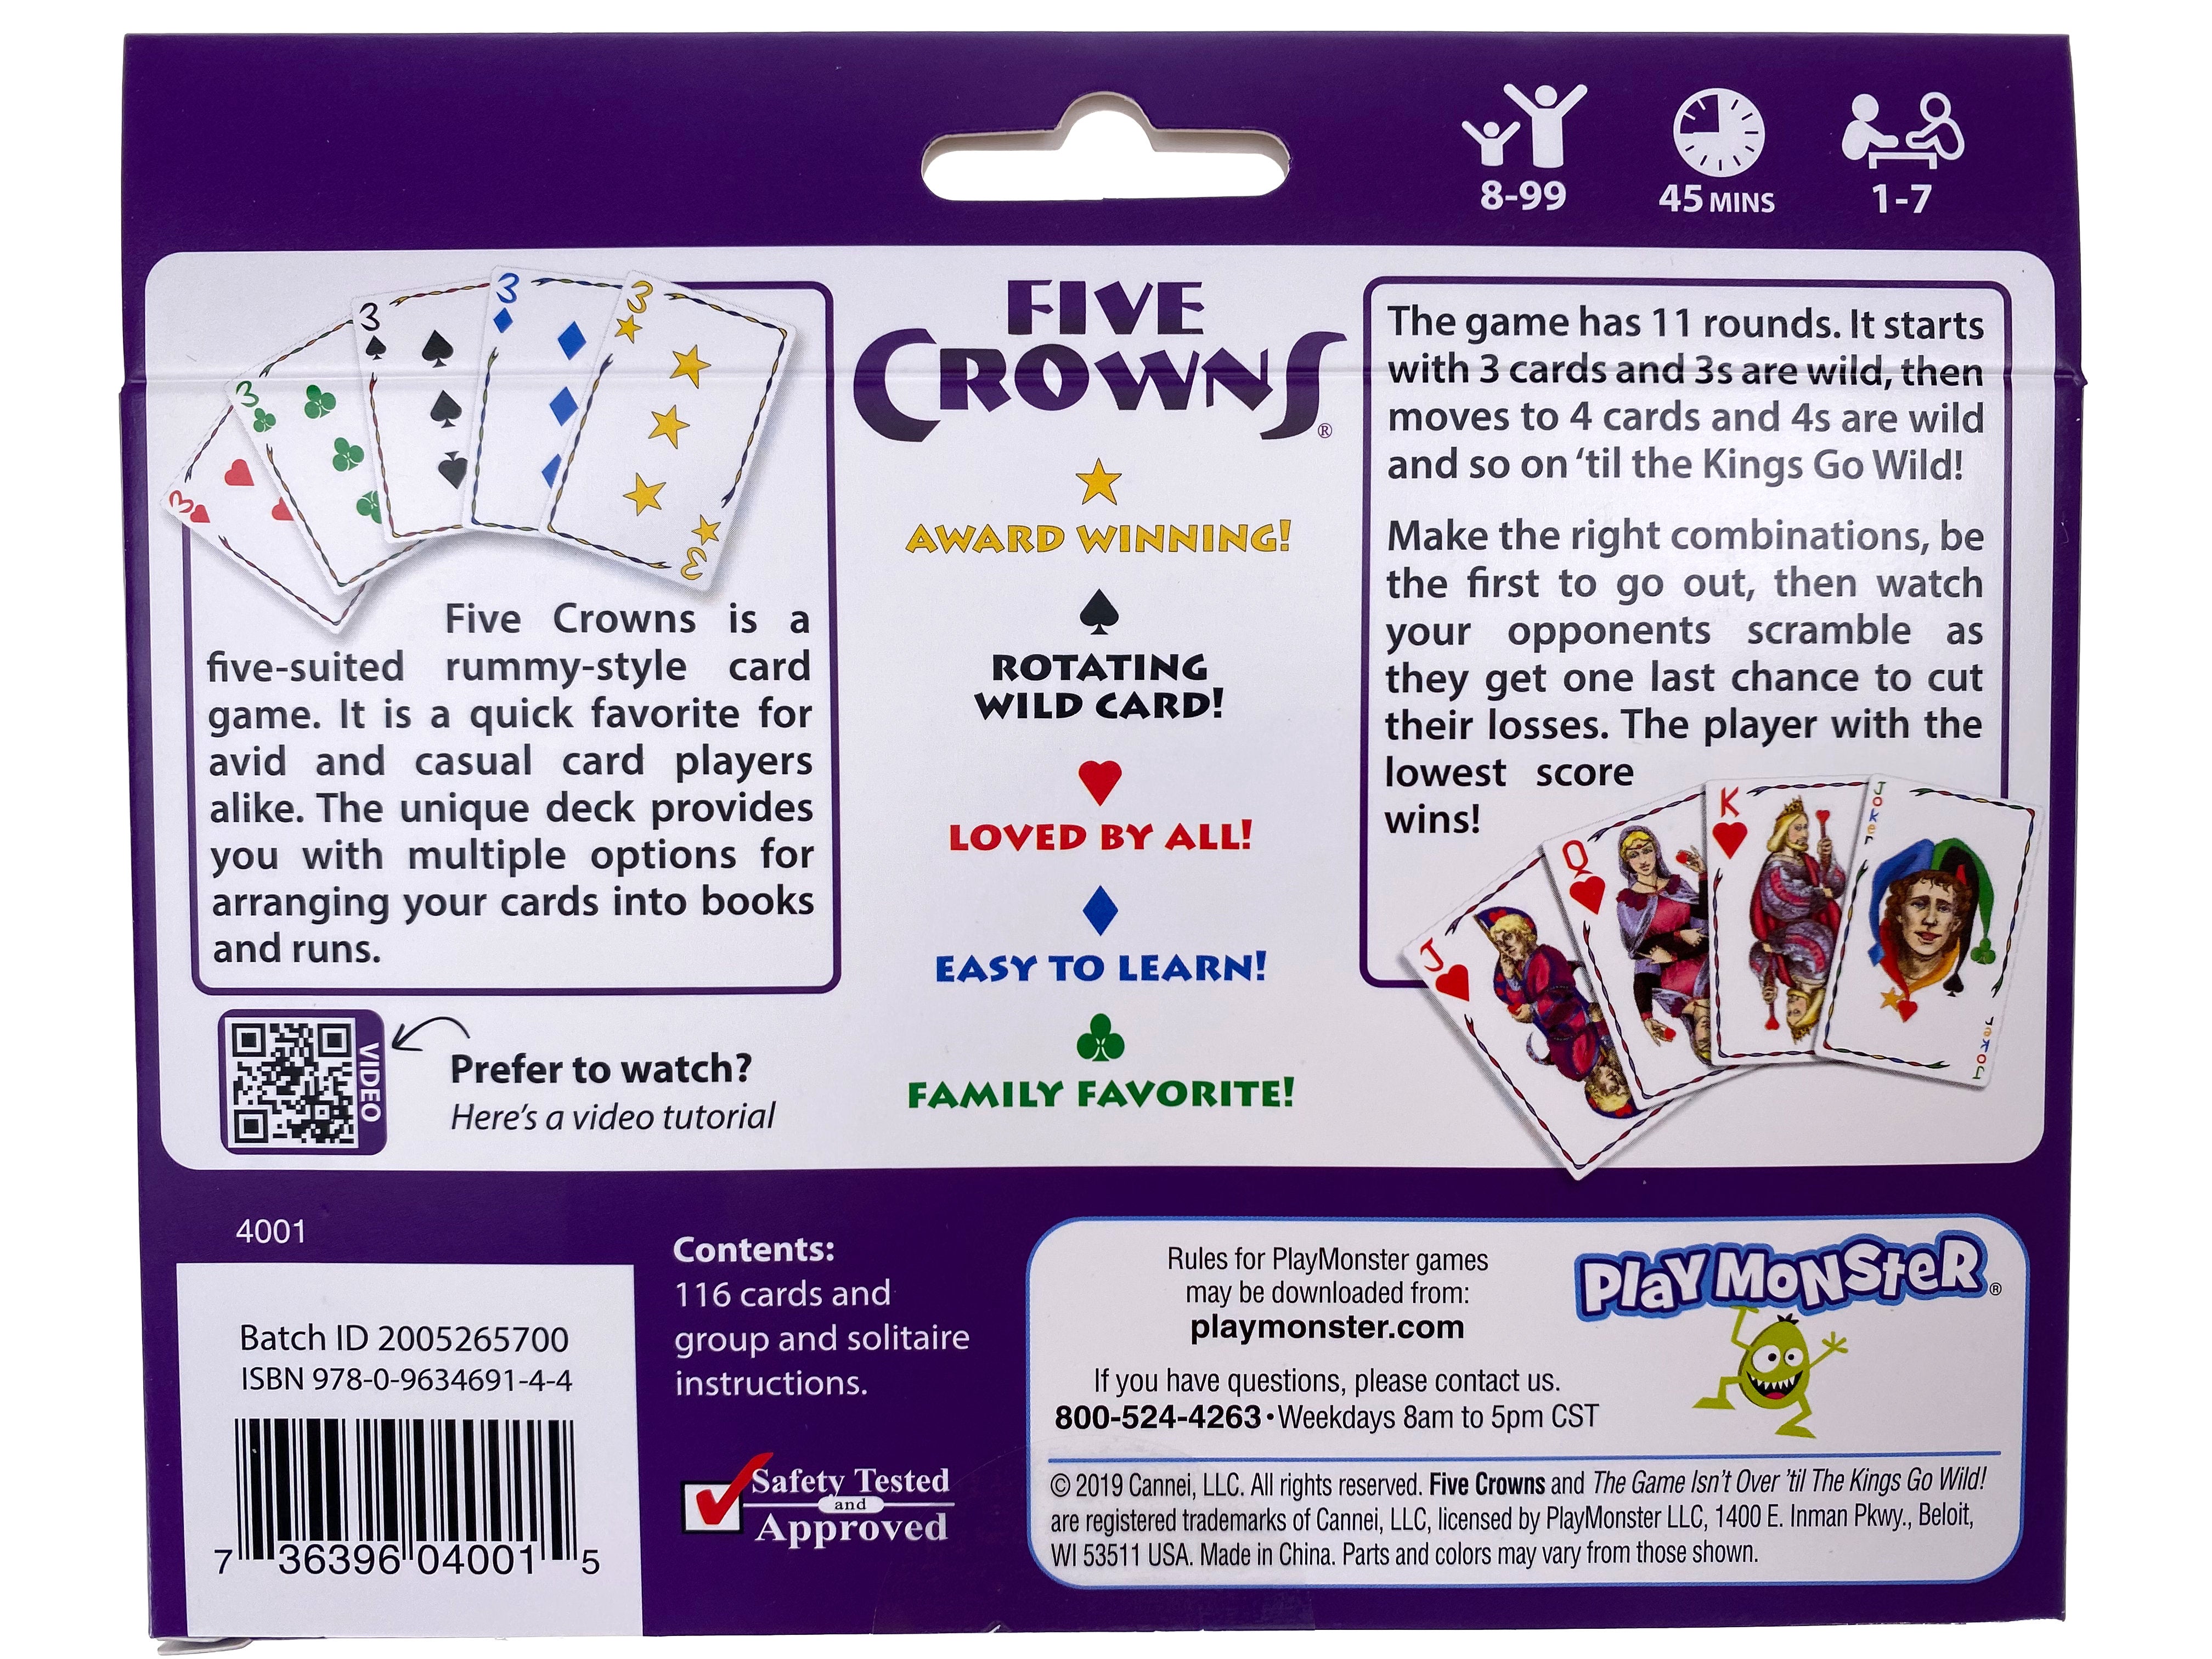 Buy Five Crowns® Mini Round Card Game at S&S Worldwide